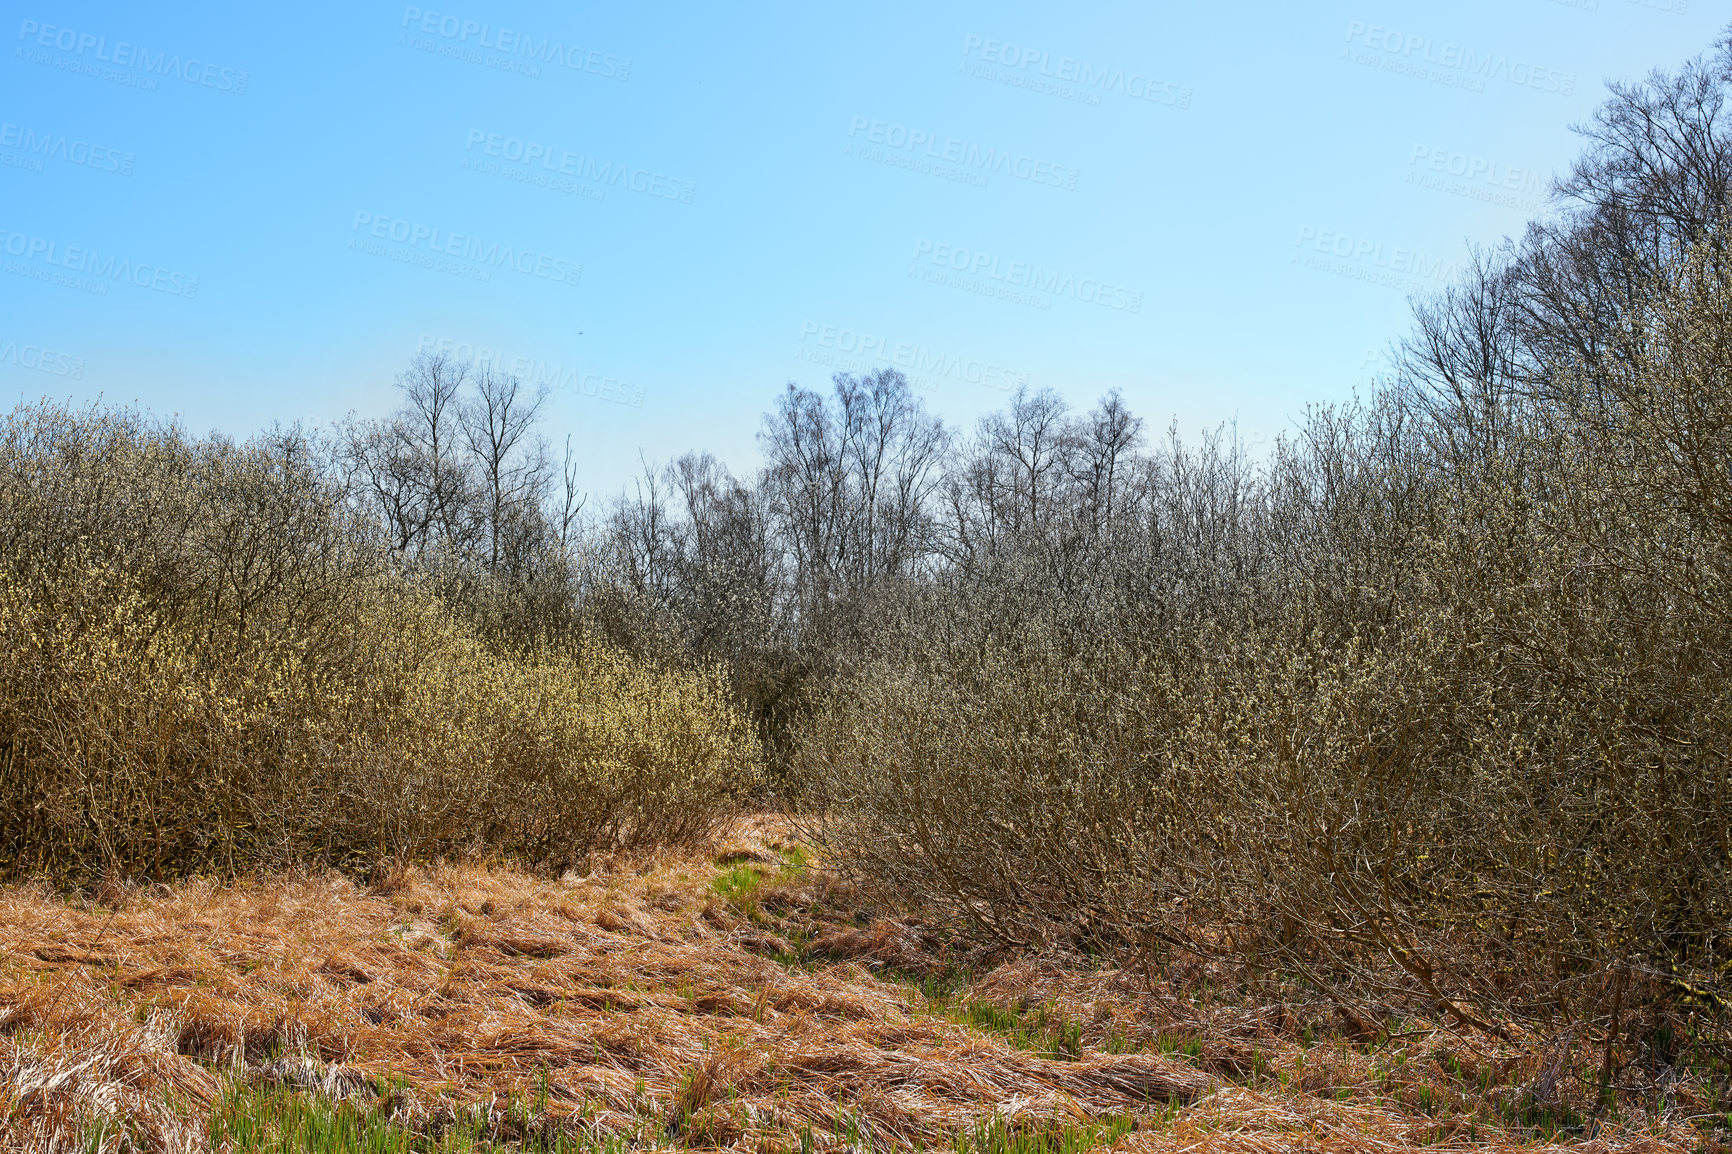 Buy stock photo Landscape view of dry bushes in pine, fir or cedar tree forest in Sweden. Brown shrubs and grass growing in quiet, wild and remote coniferous woods for environmental nature conservation with blue sky